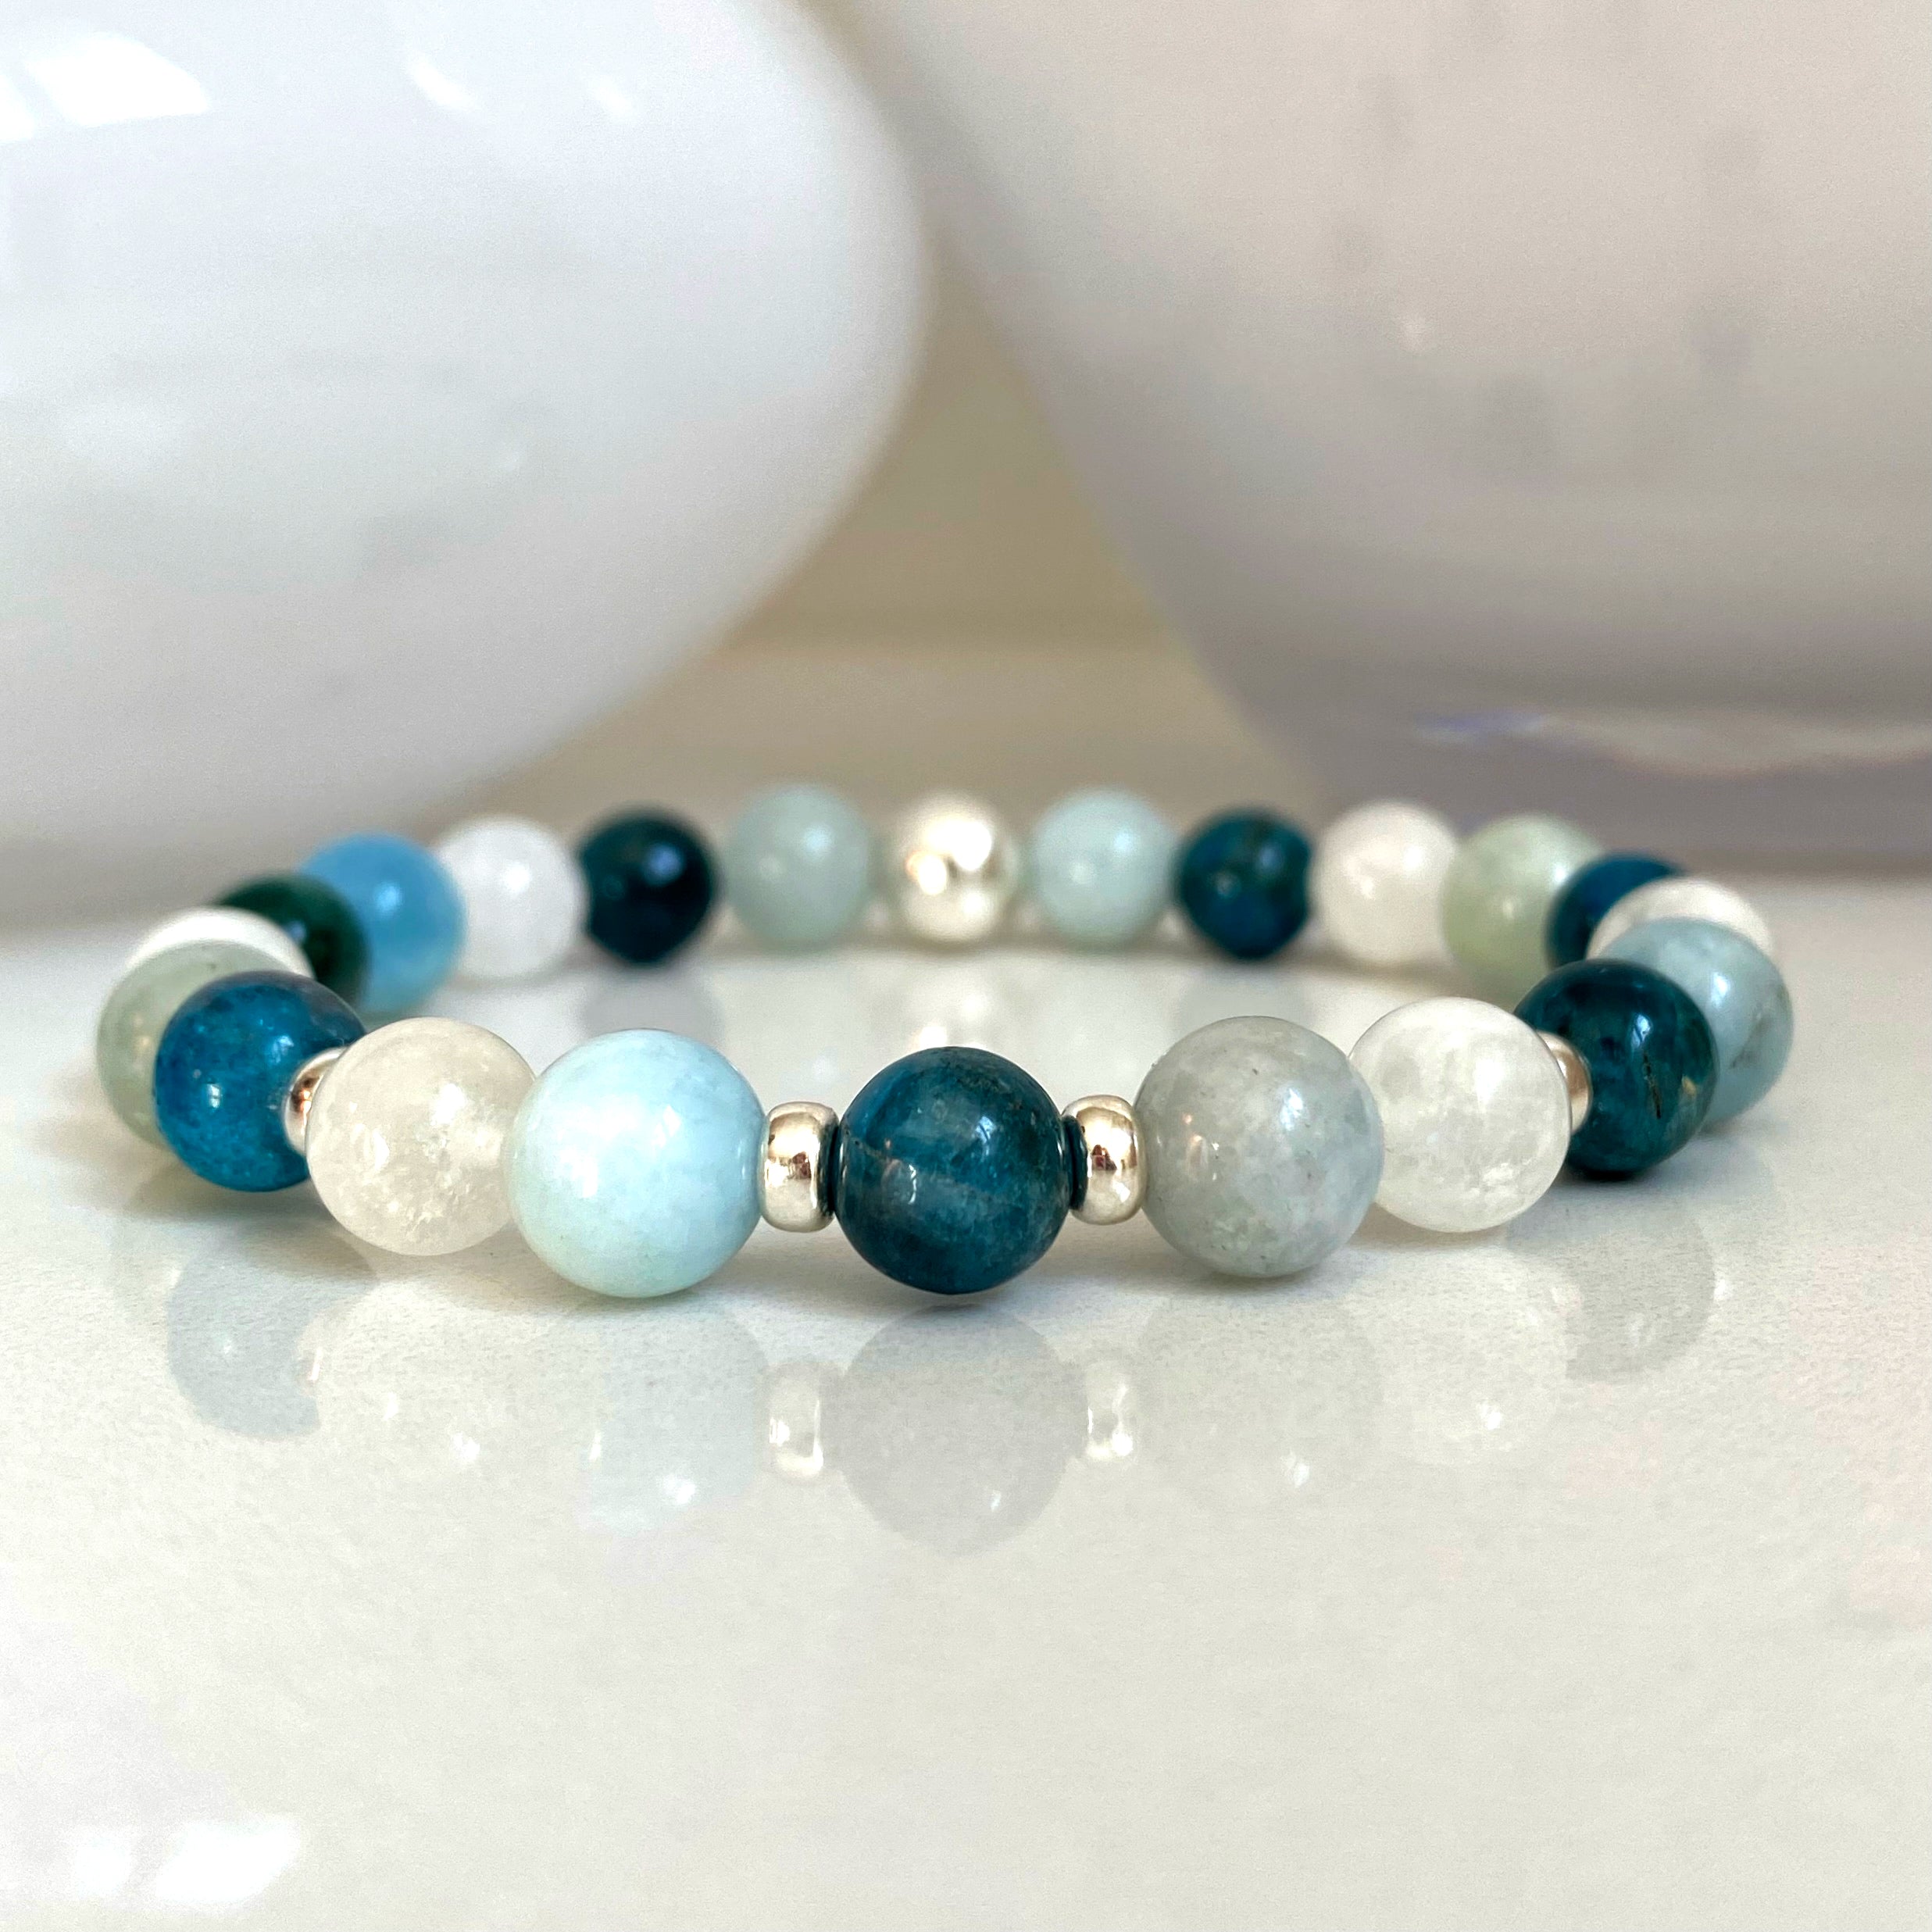 6mm Apatite Moonstone and Aquamarine Bracelet with silver accessories